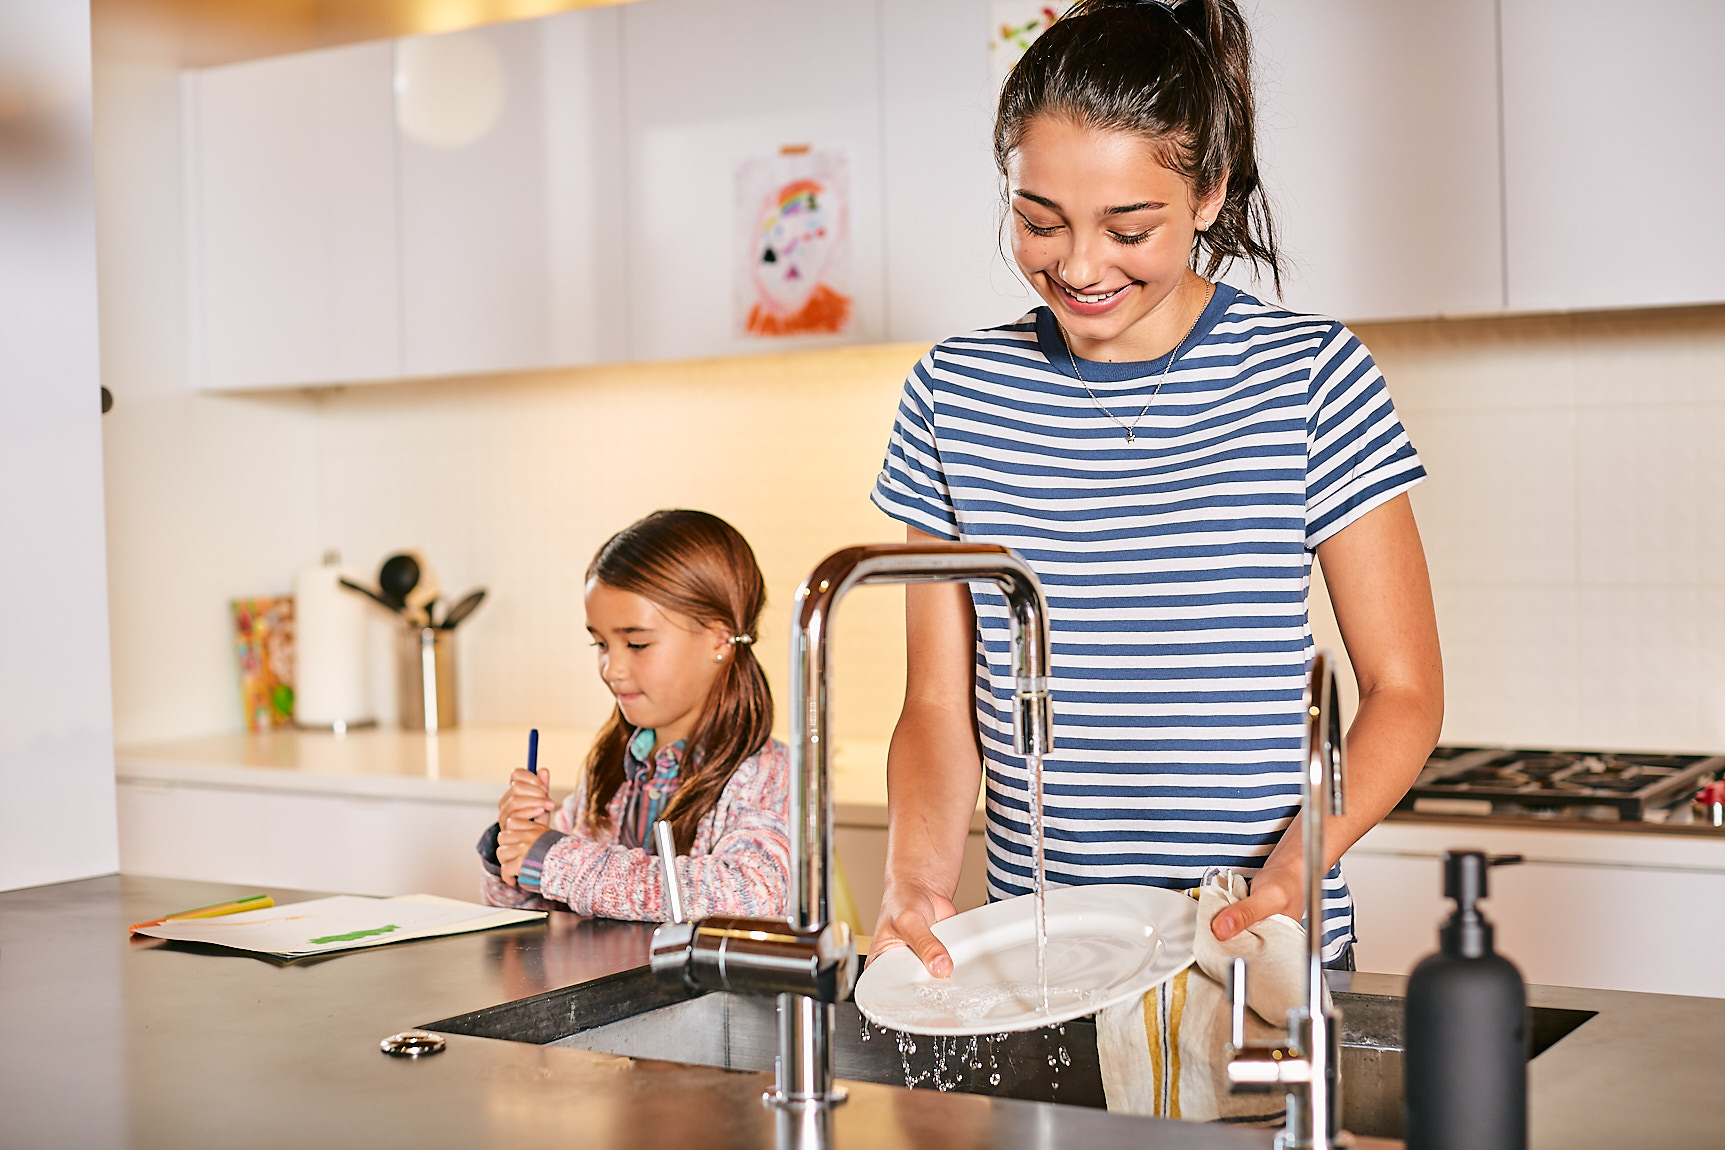 Siblings do the dishes, a lifestyle image from a photoshoot by Leah Verwey